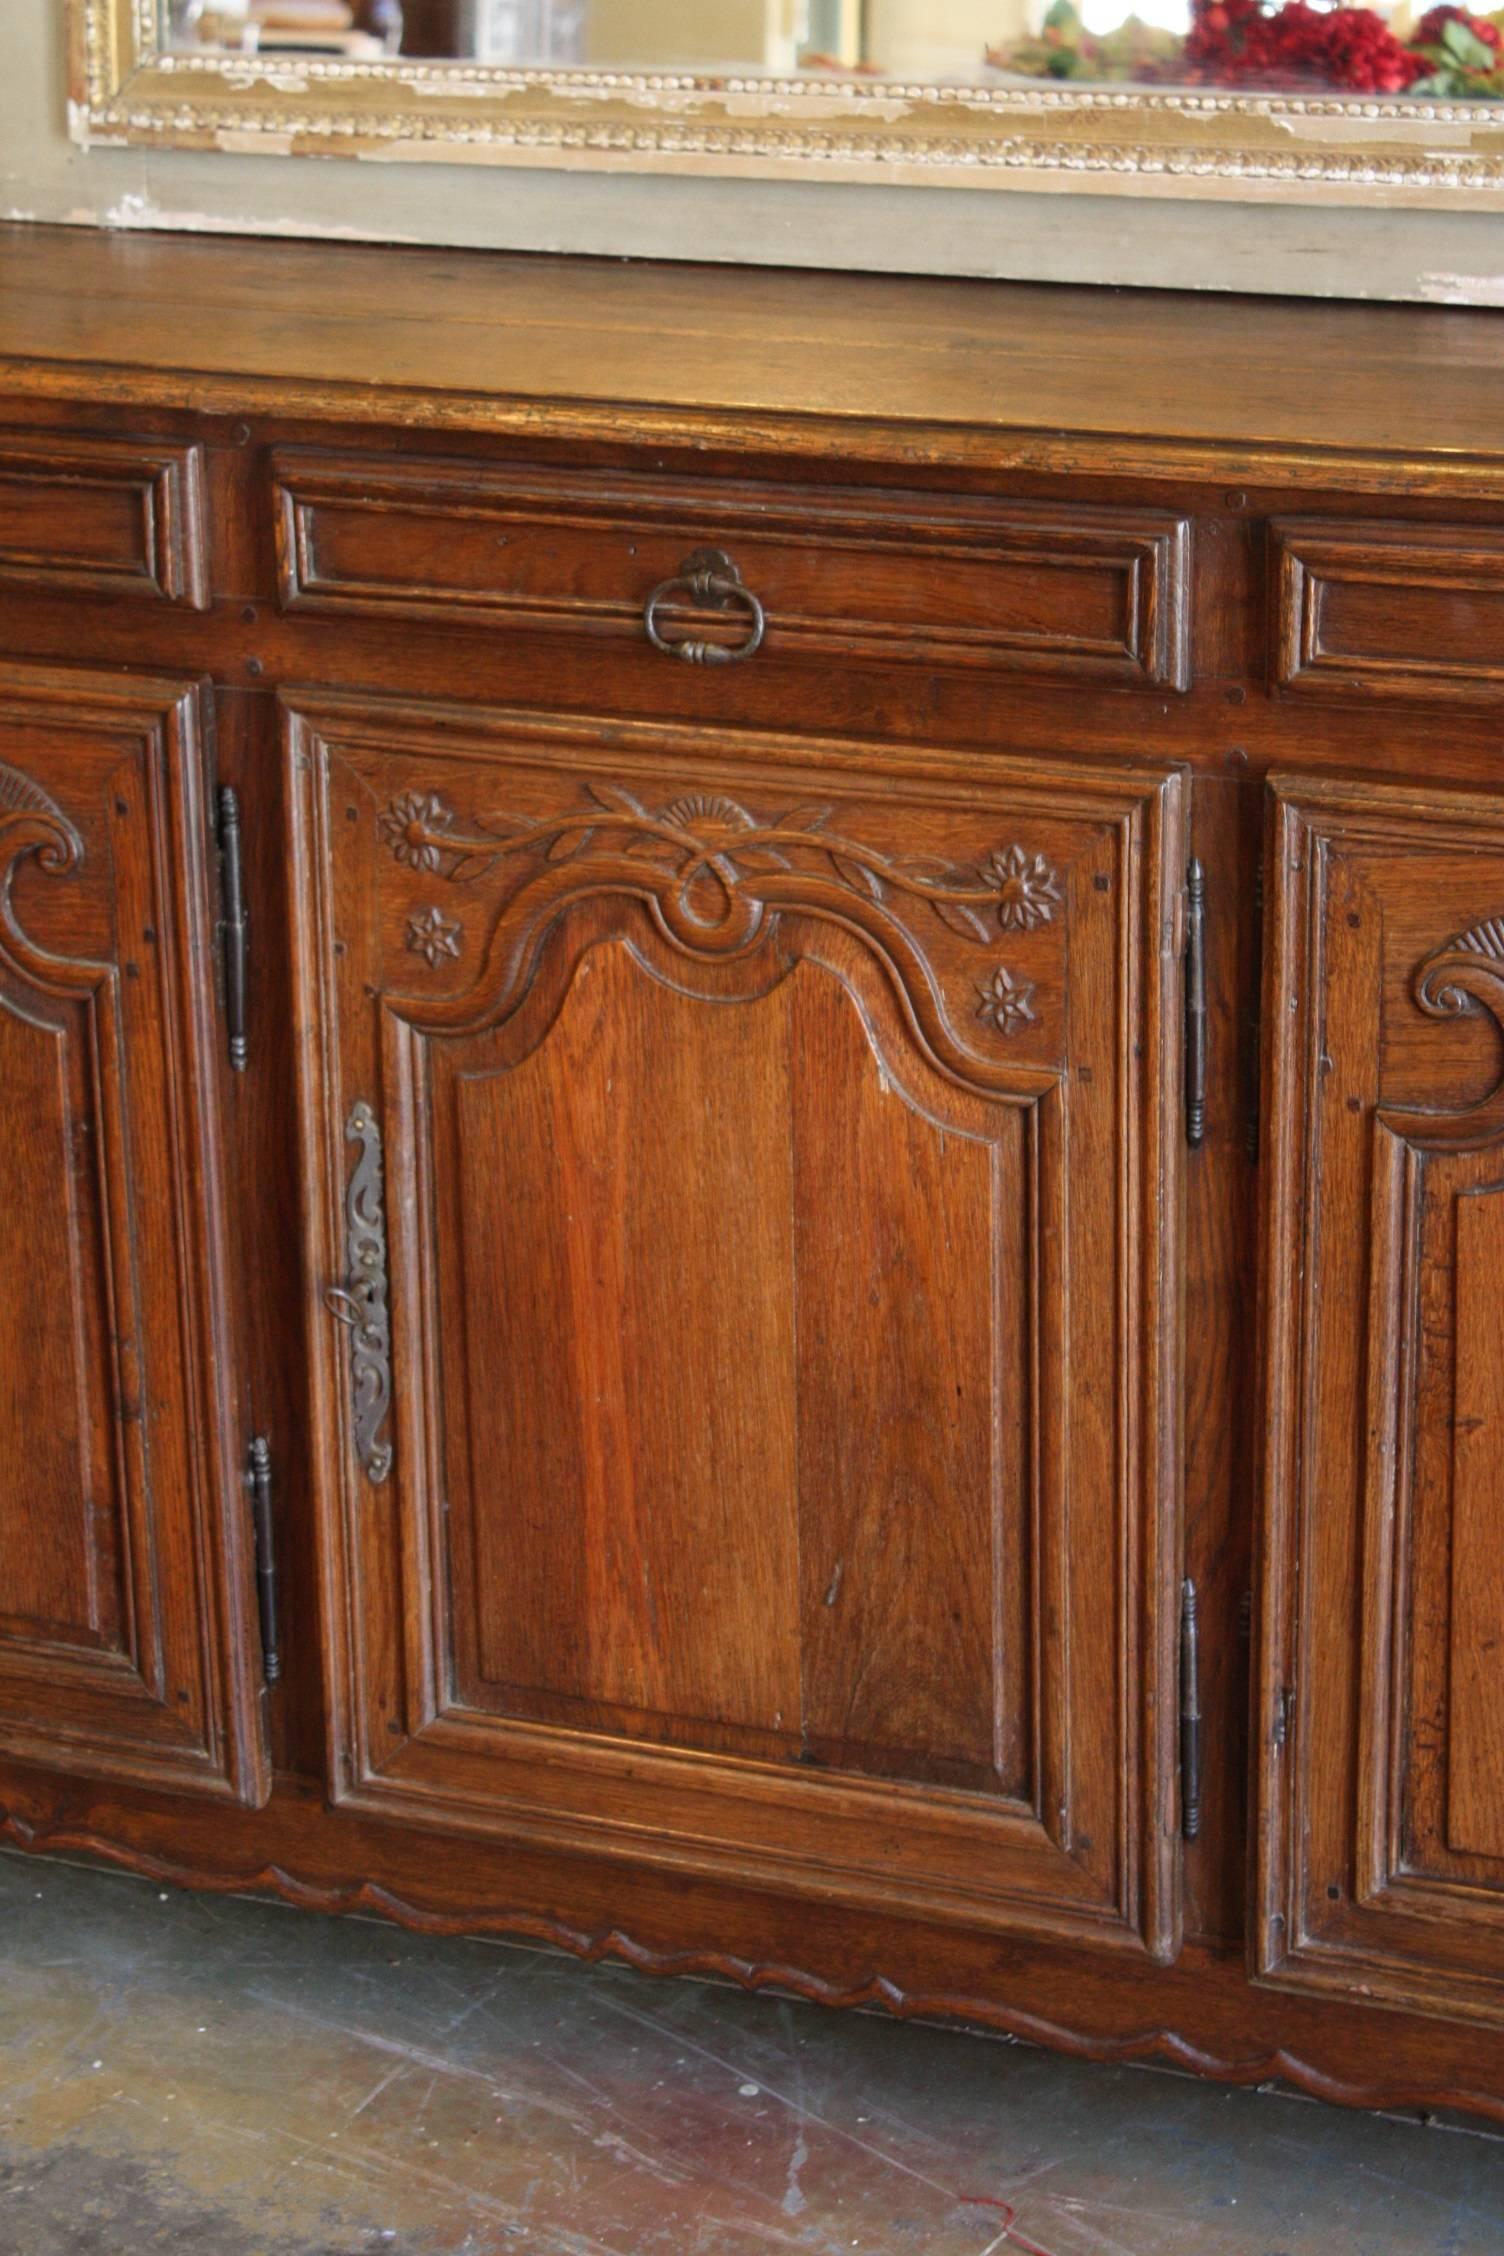 19th century Louis XV carved oak enfilde featuring fine hand-carved details and a rich patina. Five drawers and five large doors that give you plenty of storage. This piece also features unique hardware, beautifully carved shaped apron and is